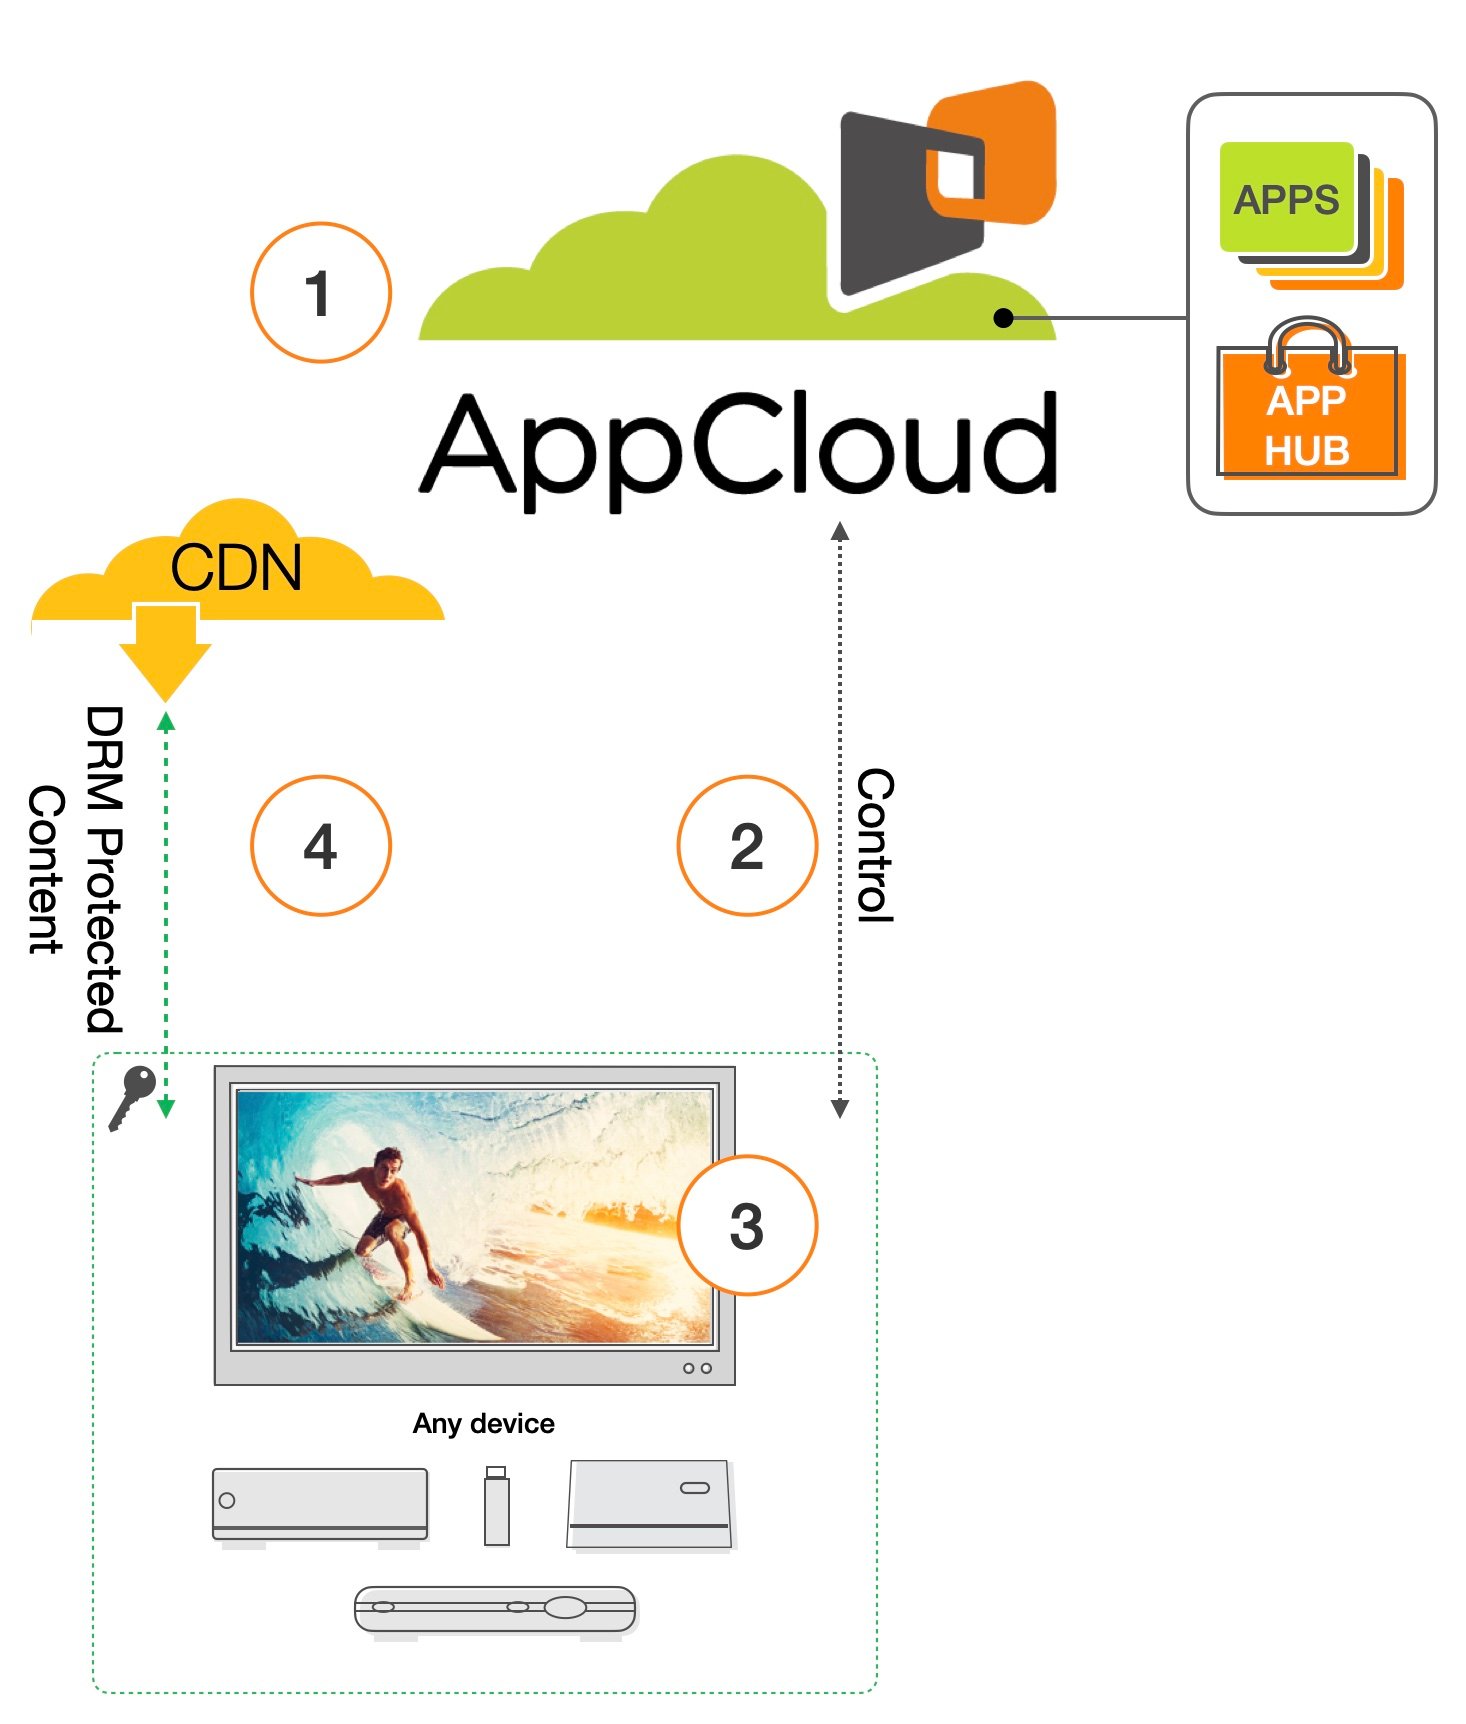 AppCloud Product Page [high-level schematic] W